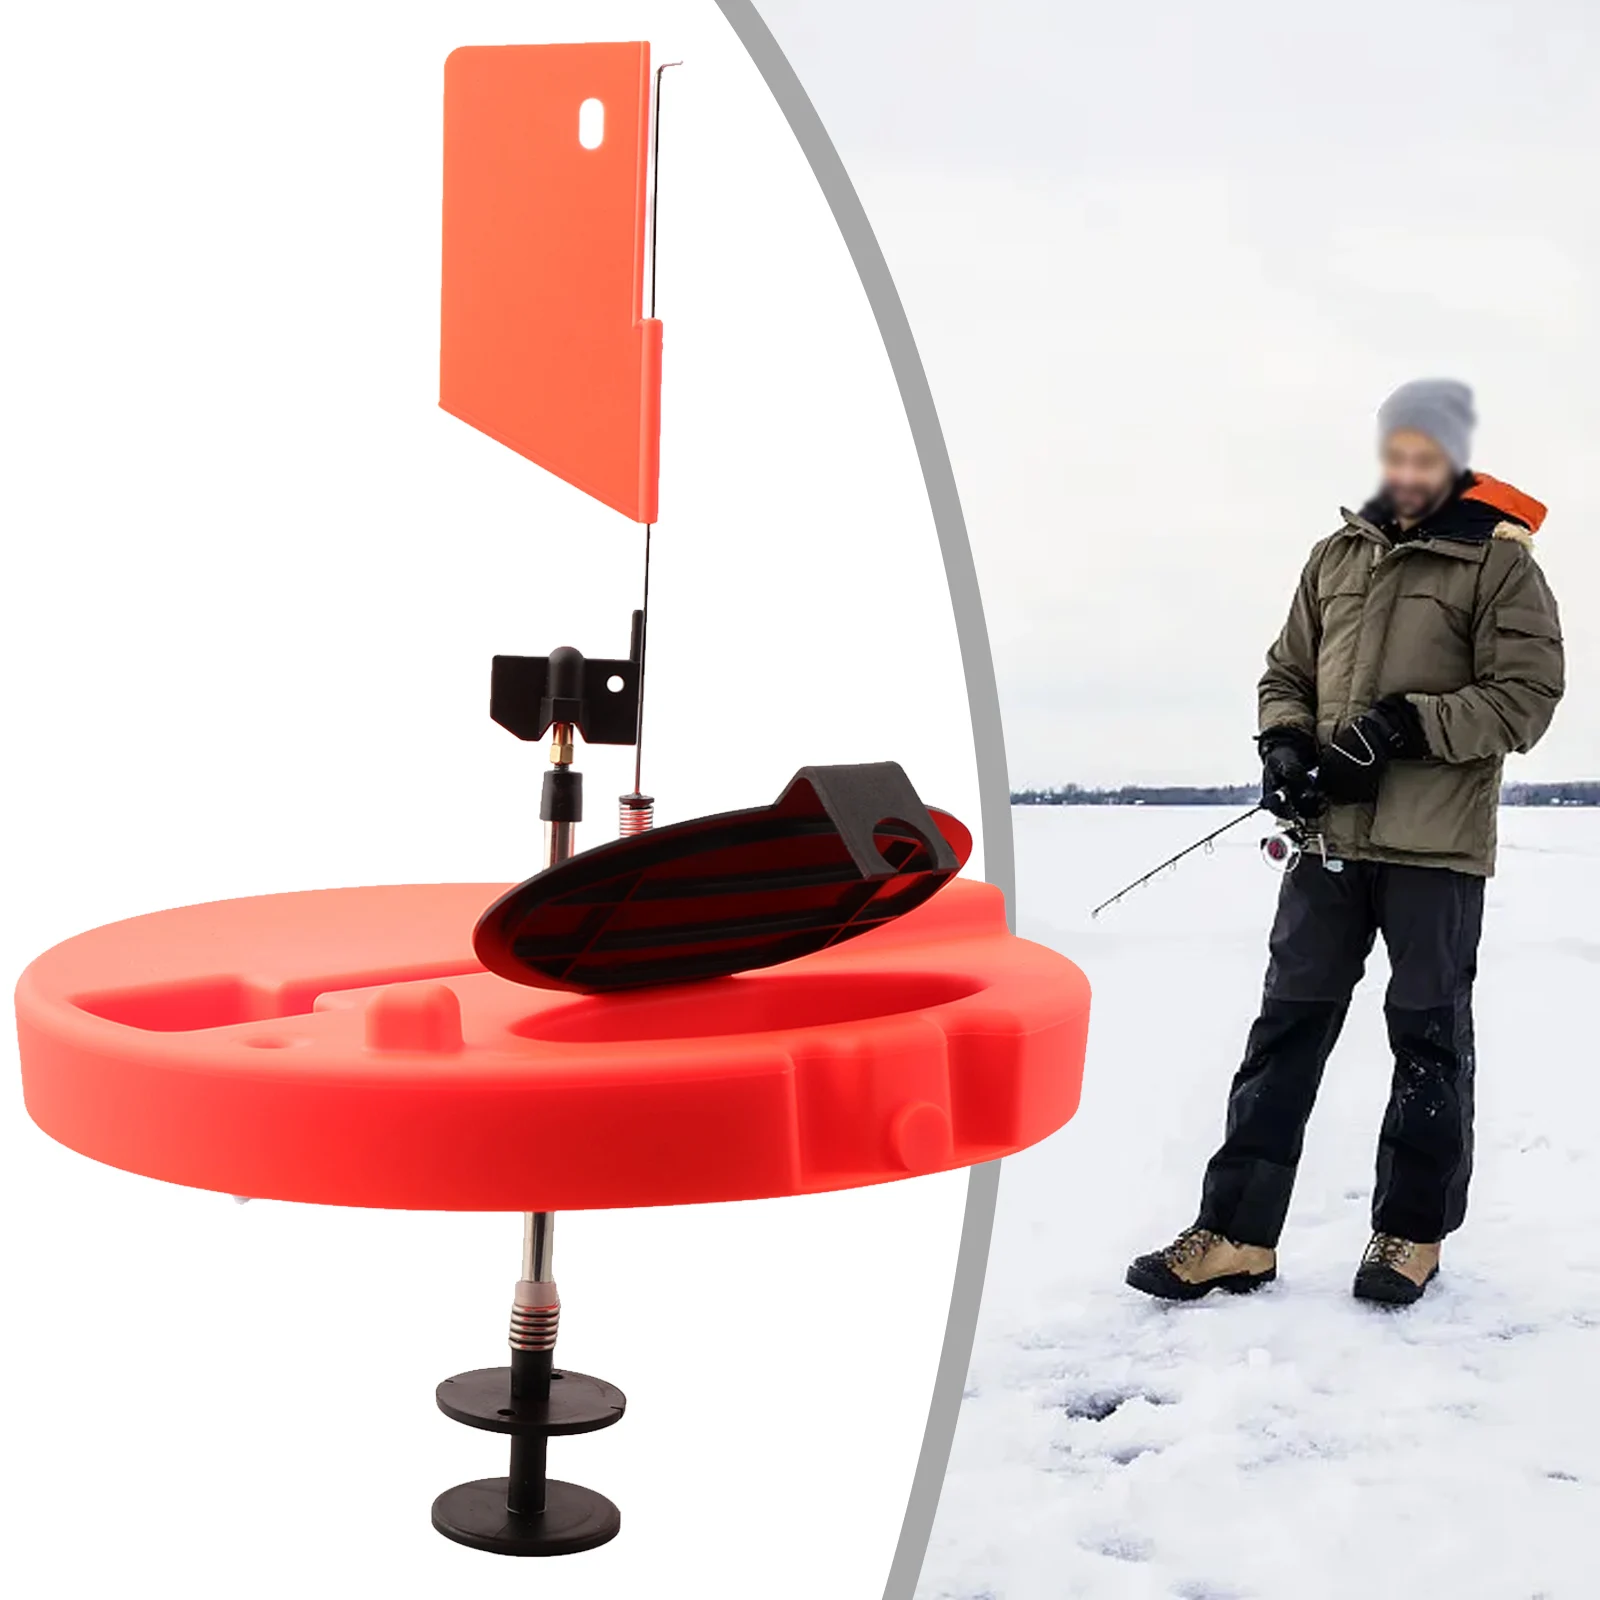 

FreezeProof Insulated Design Insulated Ice Fishing Pro Thermal TipUp 27cm Diameter Holds Common Small Accessories